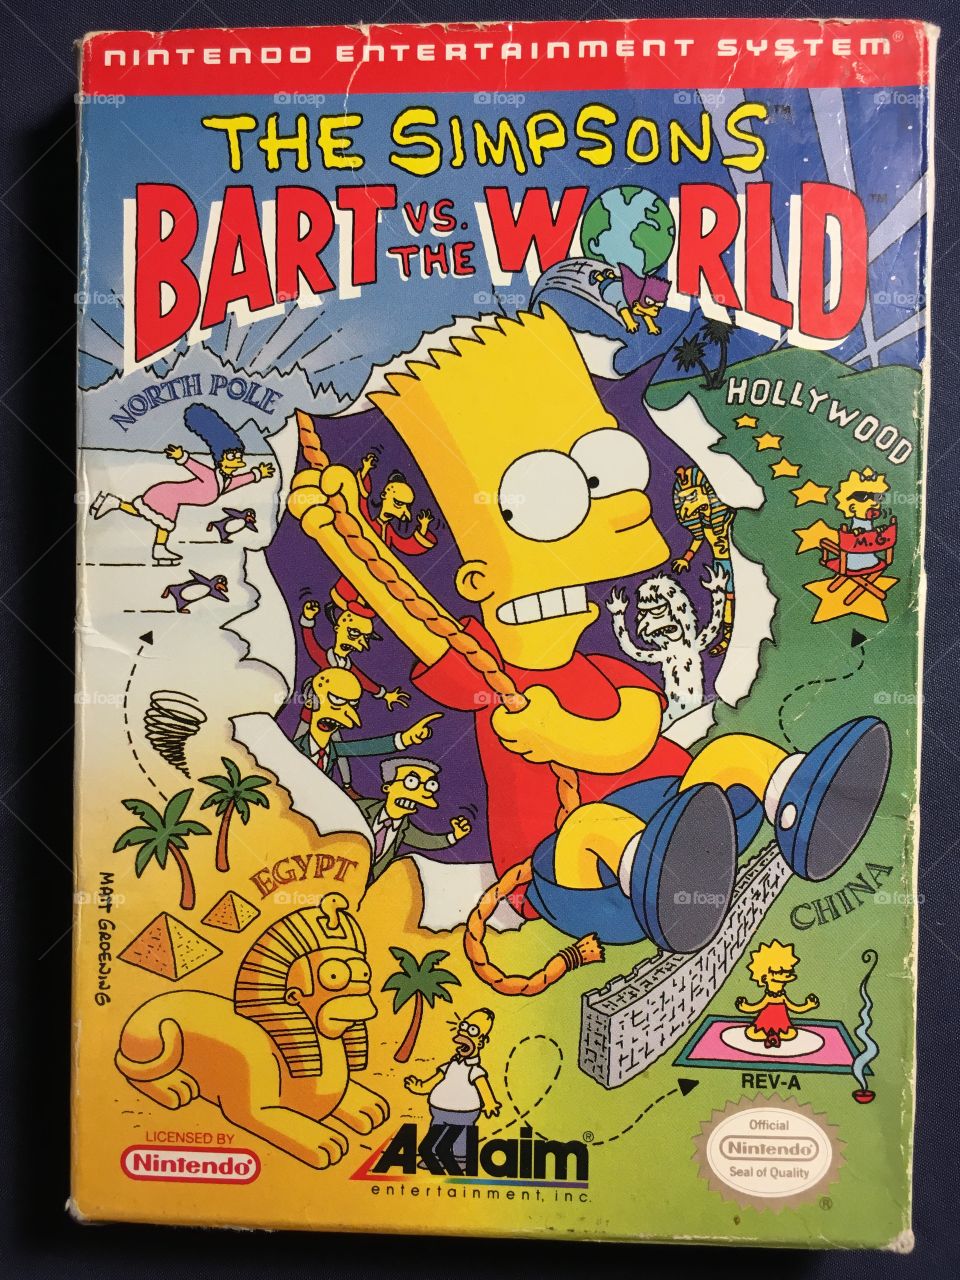 The Simpsons - Bart vs the World
Nintendo NES video game box
Released - 1991